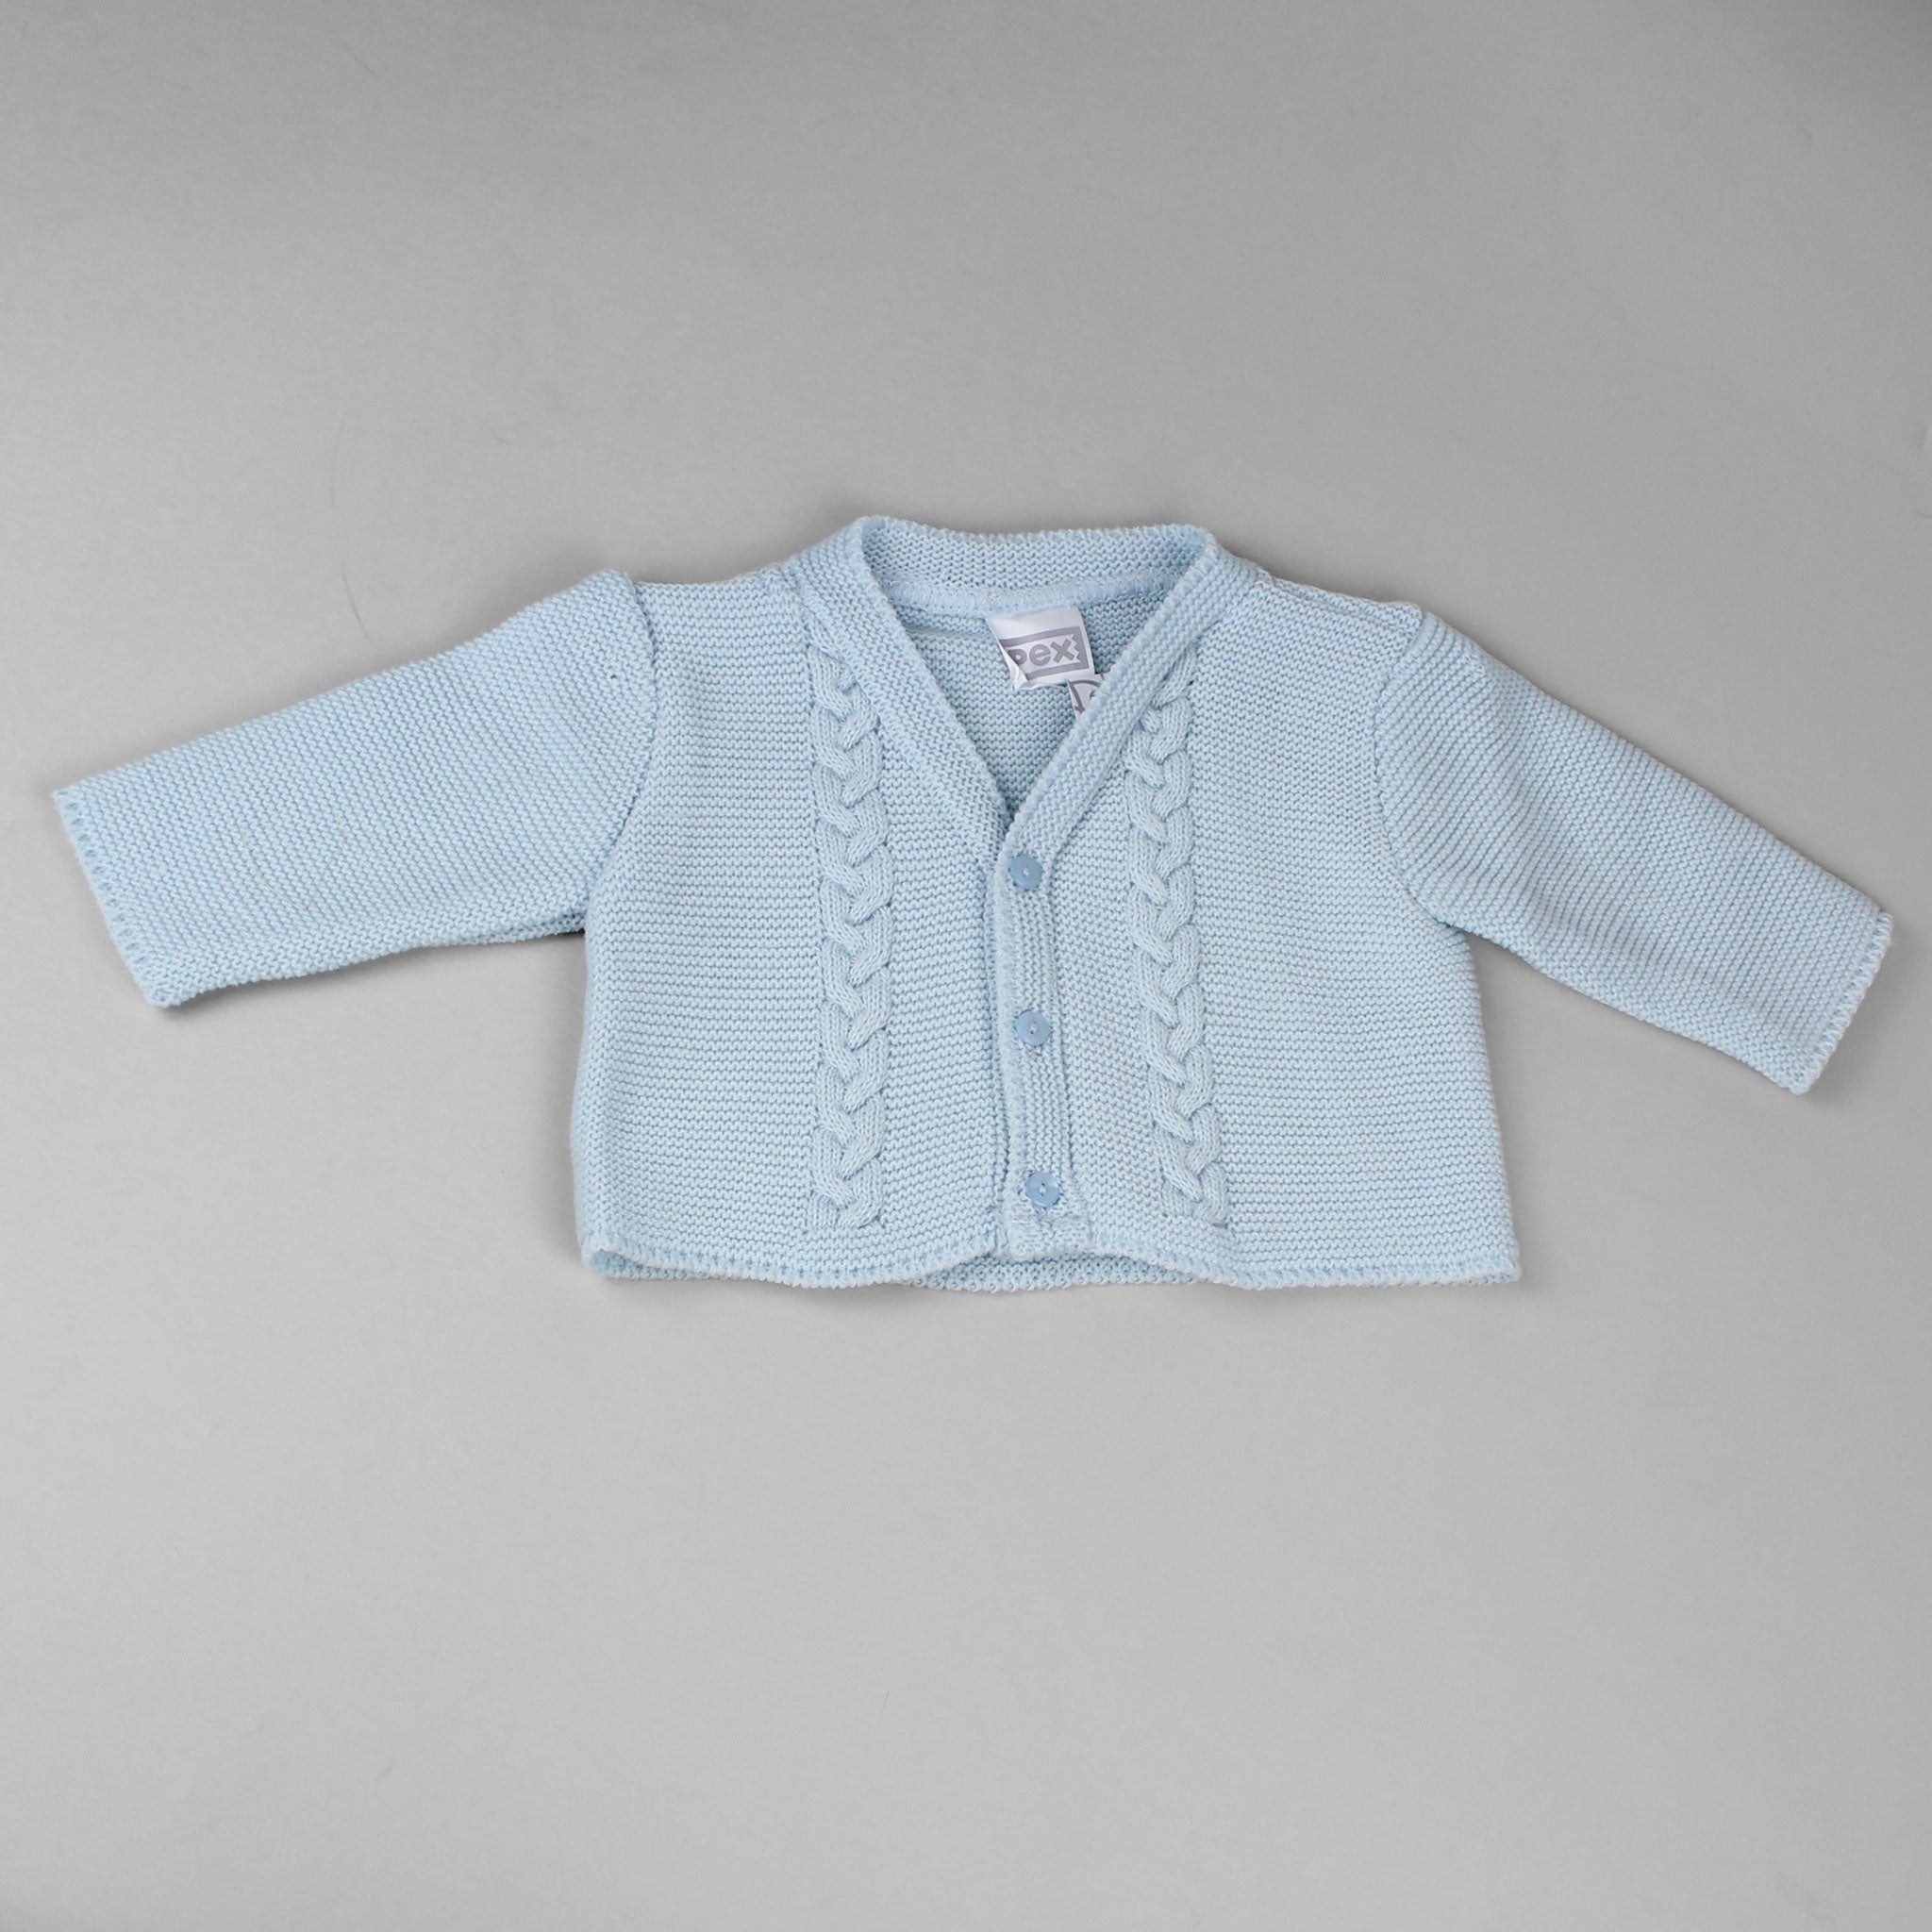 Baby boys blue cable knit cardigan by Pex